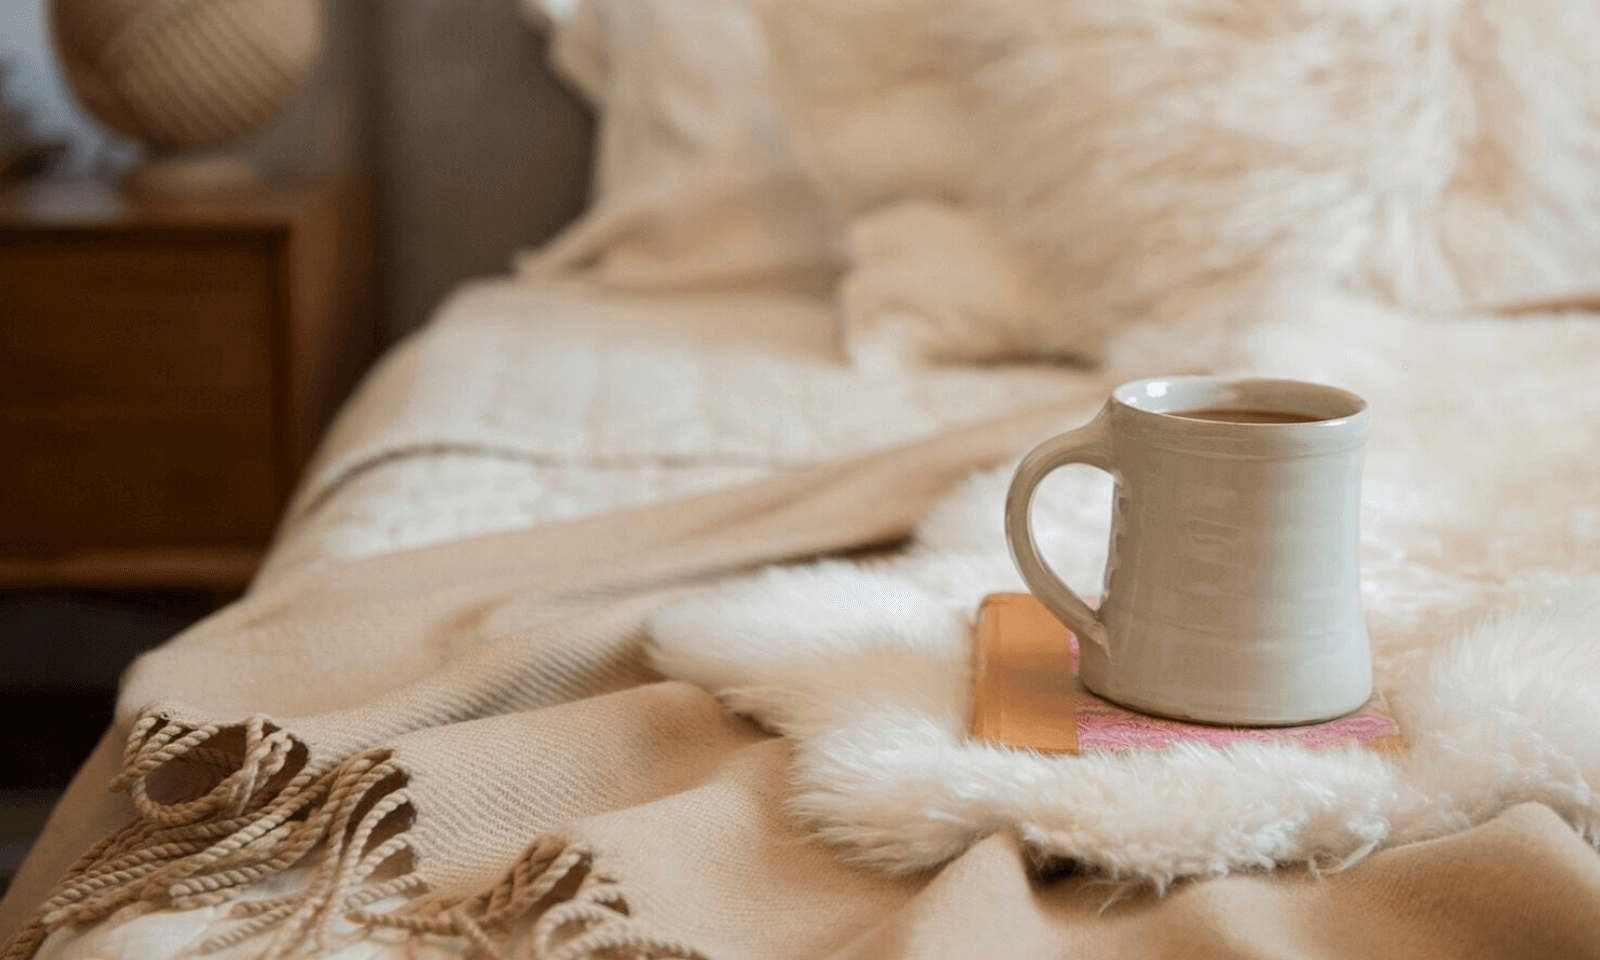 HOW TO CREATE A HEALTHY BEDROOM THIS WINTER SEASON